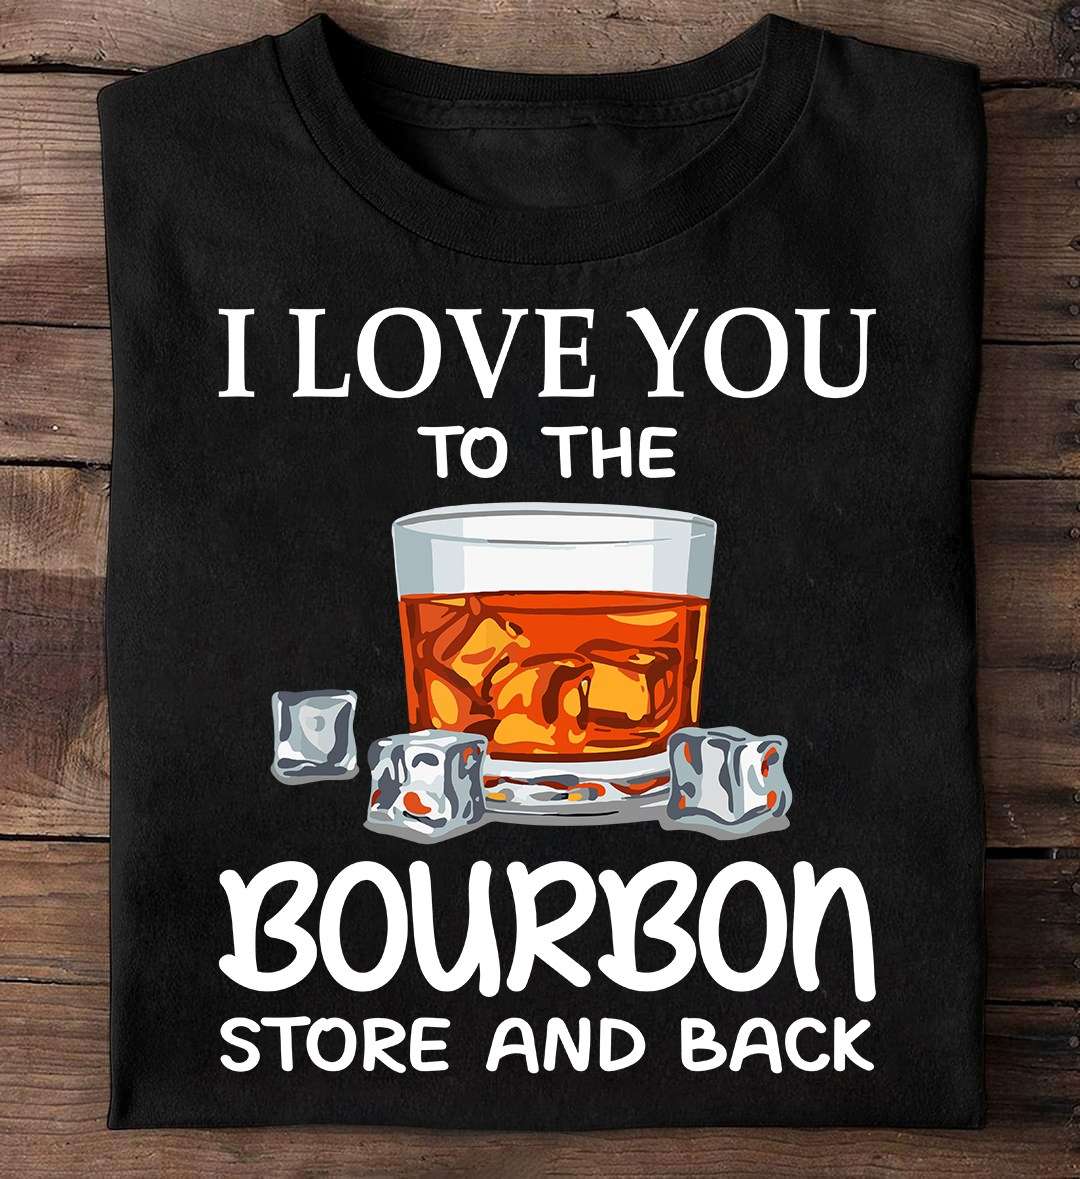 I love you to the bourbon store and back - T-shirt for bourbon drinker, bourbon wine lover